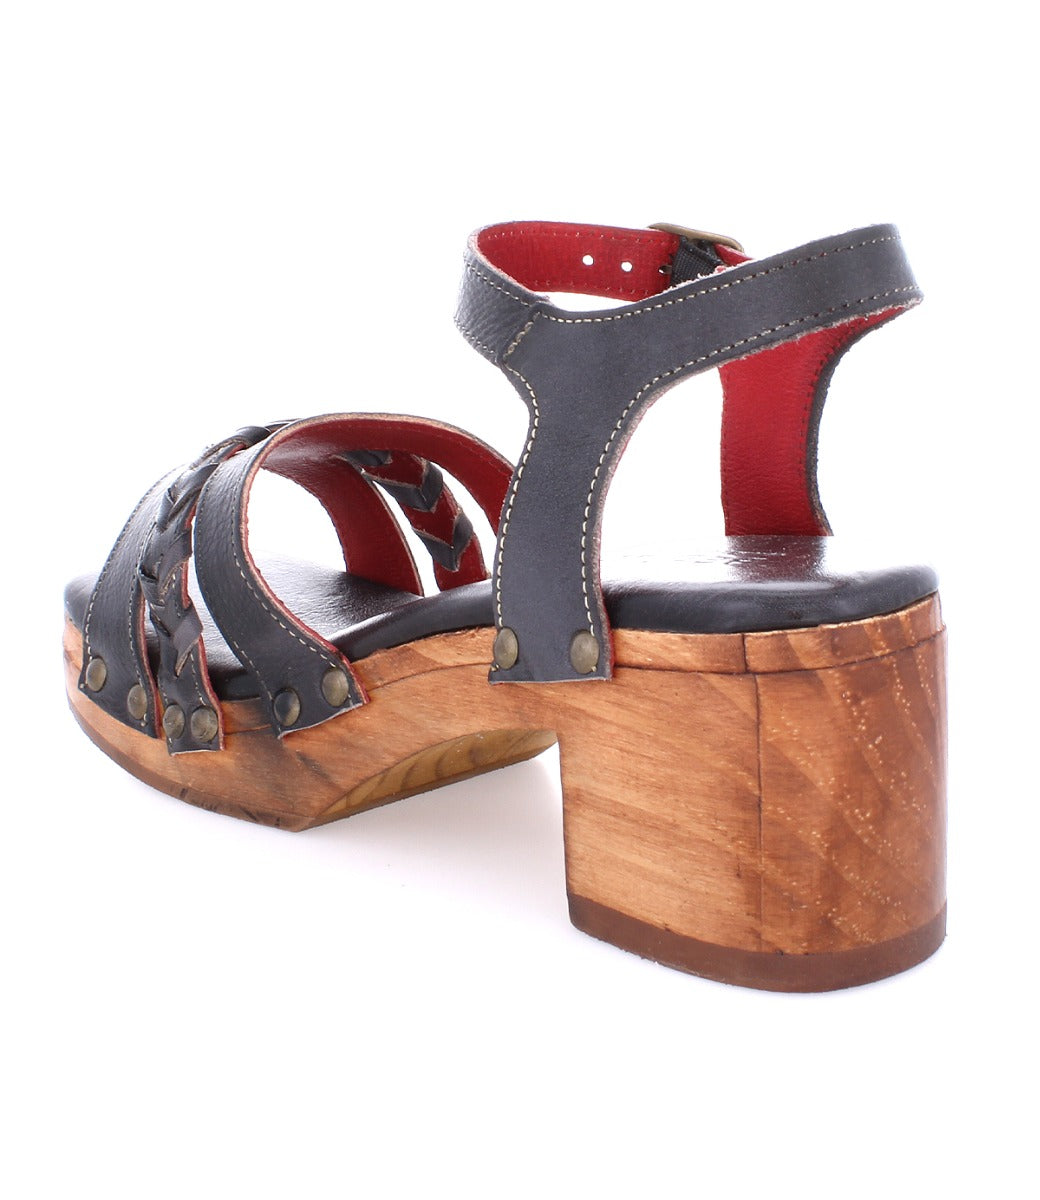 A women's Mantis sandal with a wooden heel and straps by Bed Stu.